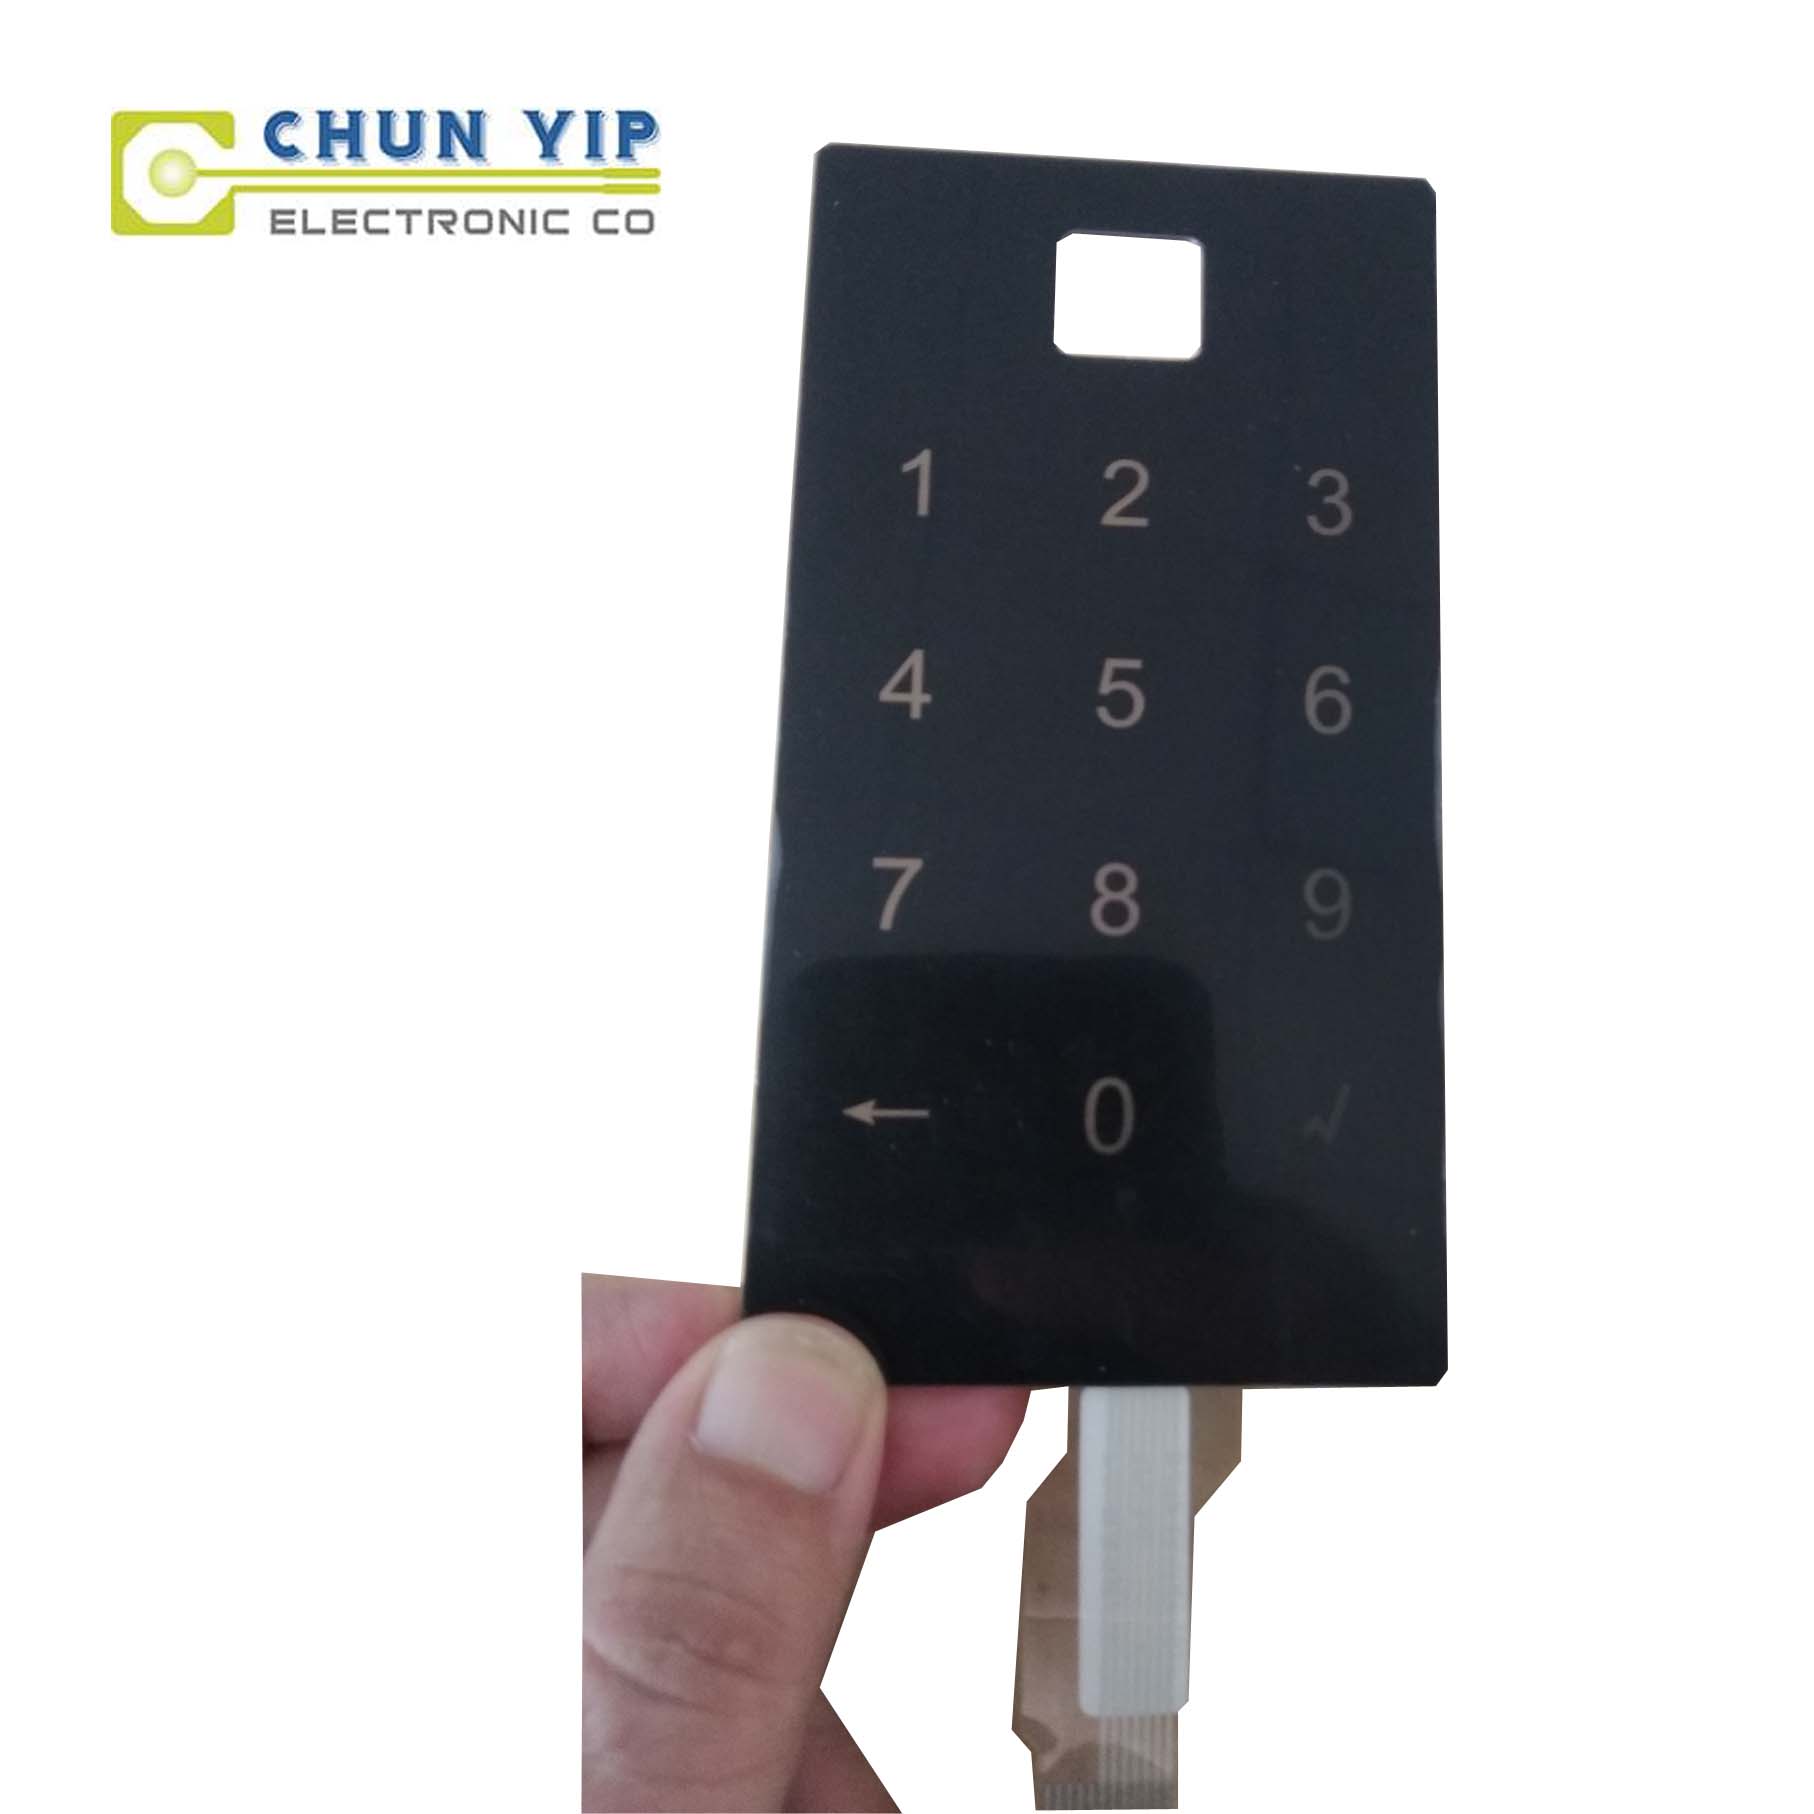 Prepainted Aluminum Coil Alligator Clips Test Leads -
 Capacitance Switch, Touch Membrane Switch, Pet Membrane Switch – Chun Yip